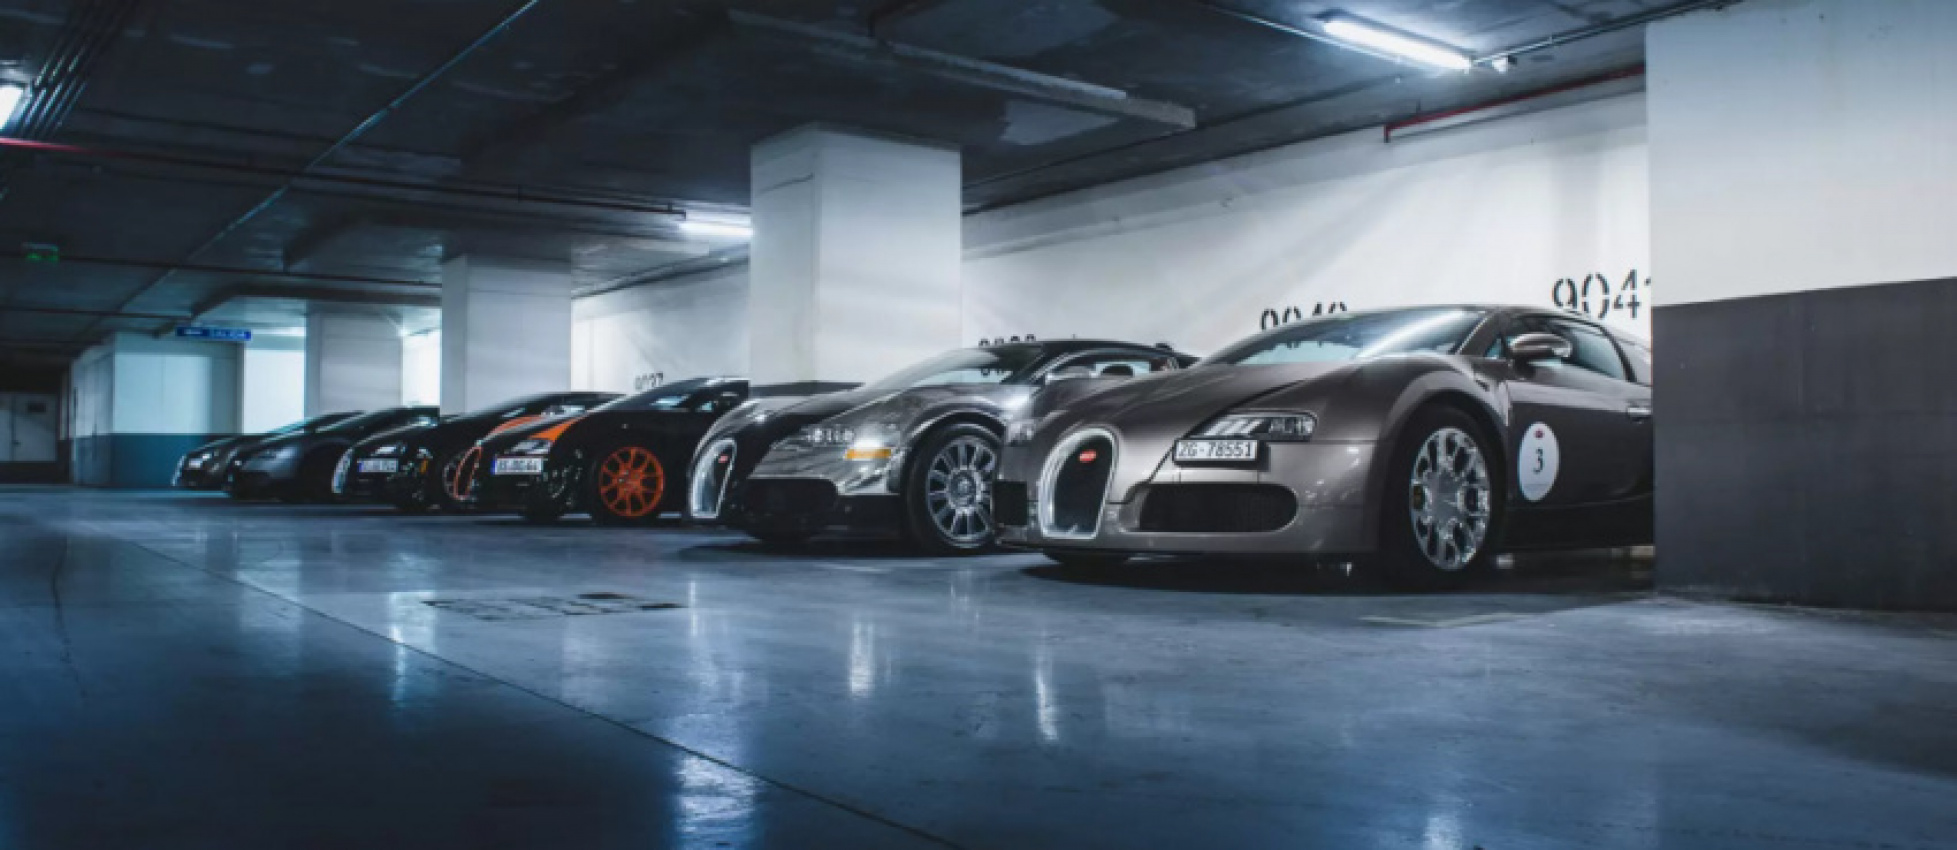 autos, bugatti, cars, celebrities, collection, supercars, tom cruise has quite a car collection from classic muscle to bugatti